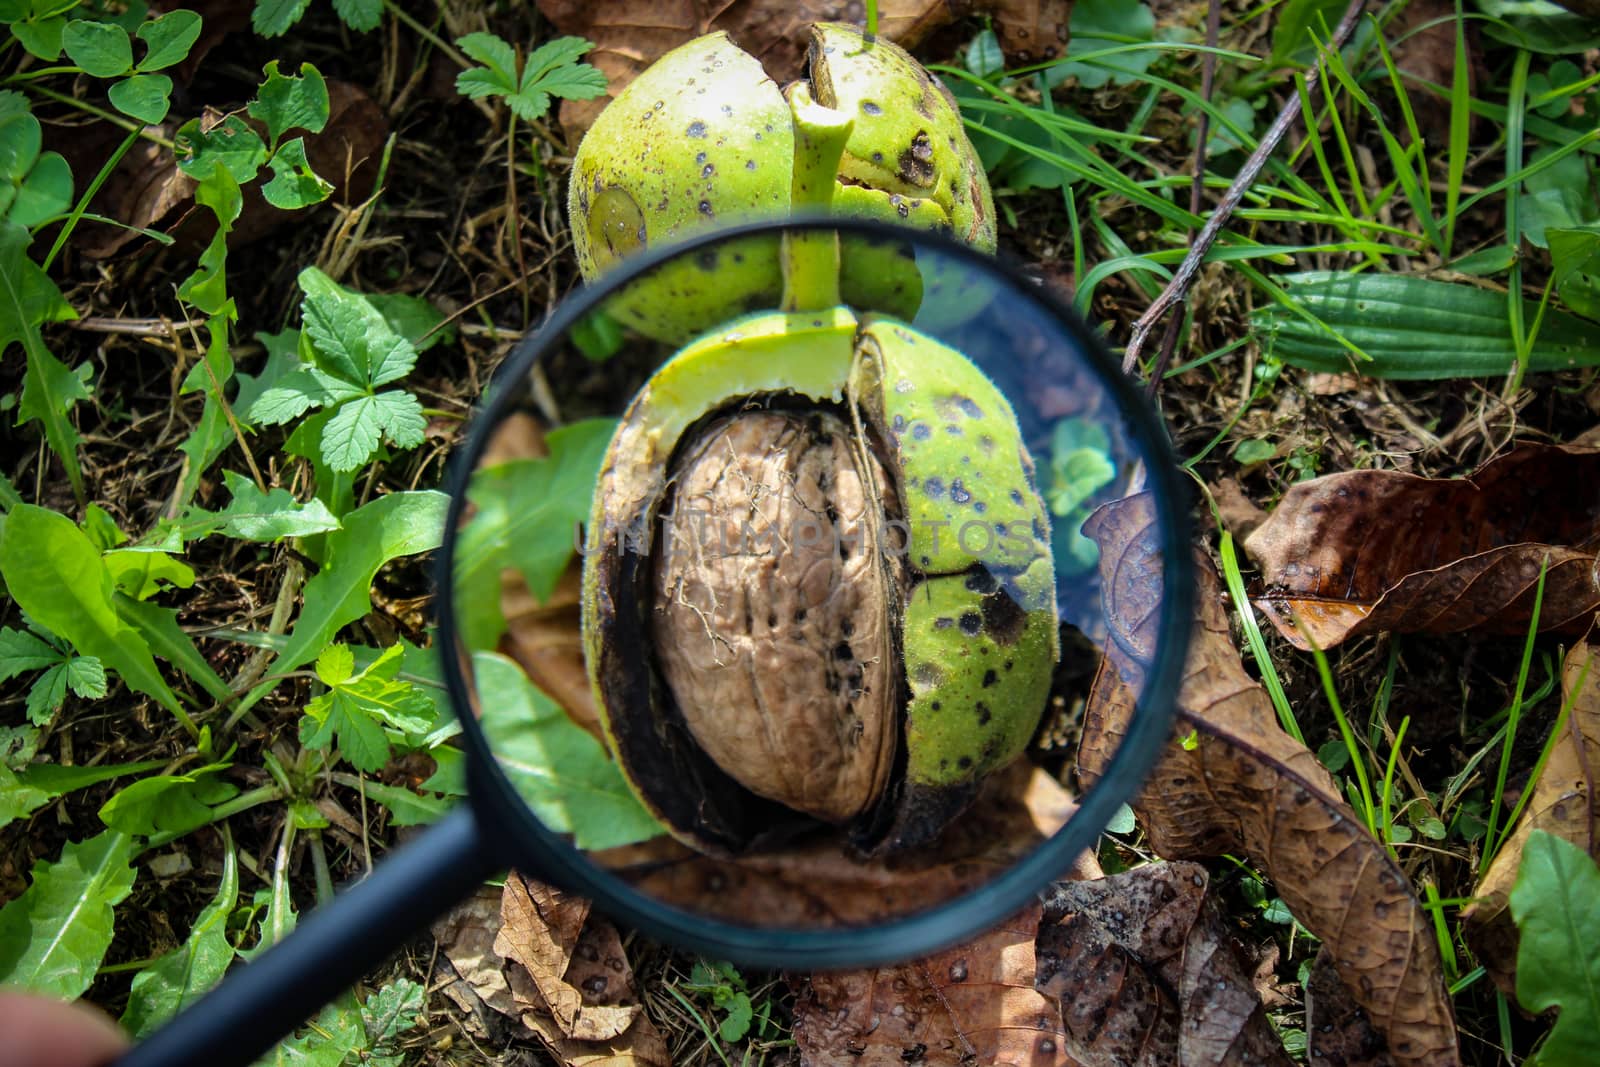 Walnut fruit inside the cracked green shell of the walnut on the ground is magnified through a magnifying glass. by mahirrov